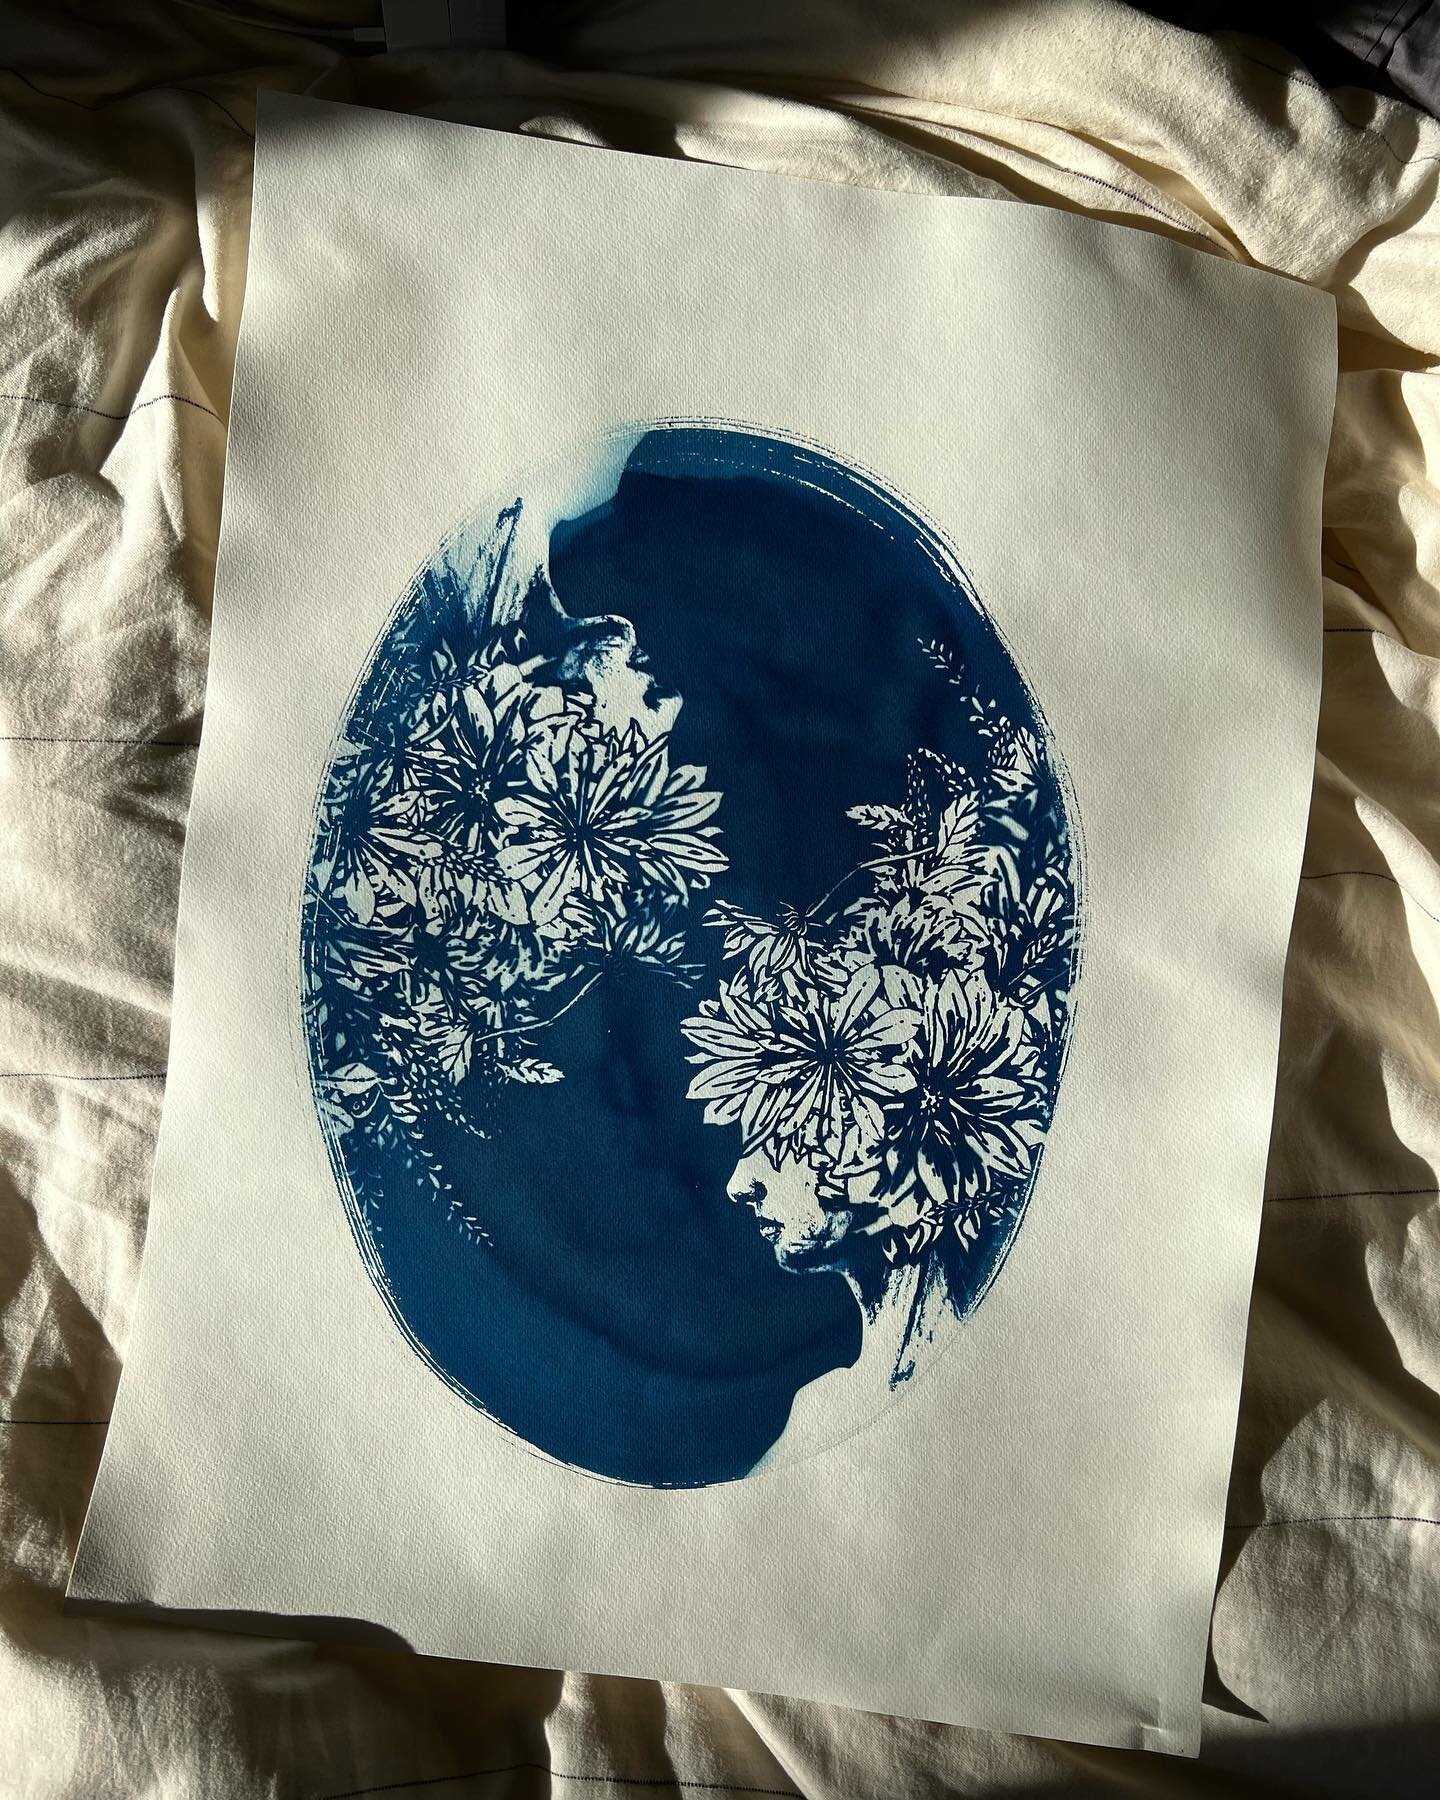 Wondering why I&rsquo;m using cyanotype printing in my art? I&rsquo;ve previously used this technique as a mile marker in documenting life events. For my 30th birthday two years ago, I had each of my family members create a cyanotype print as a birth